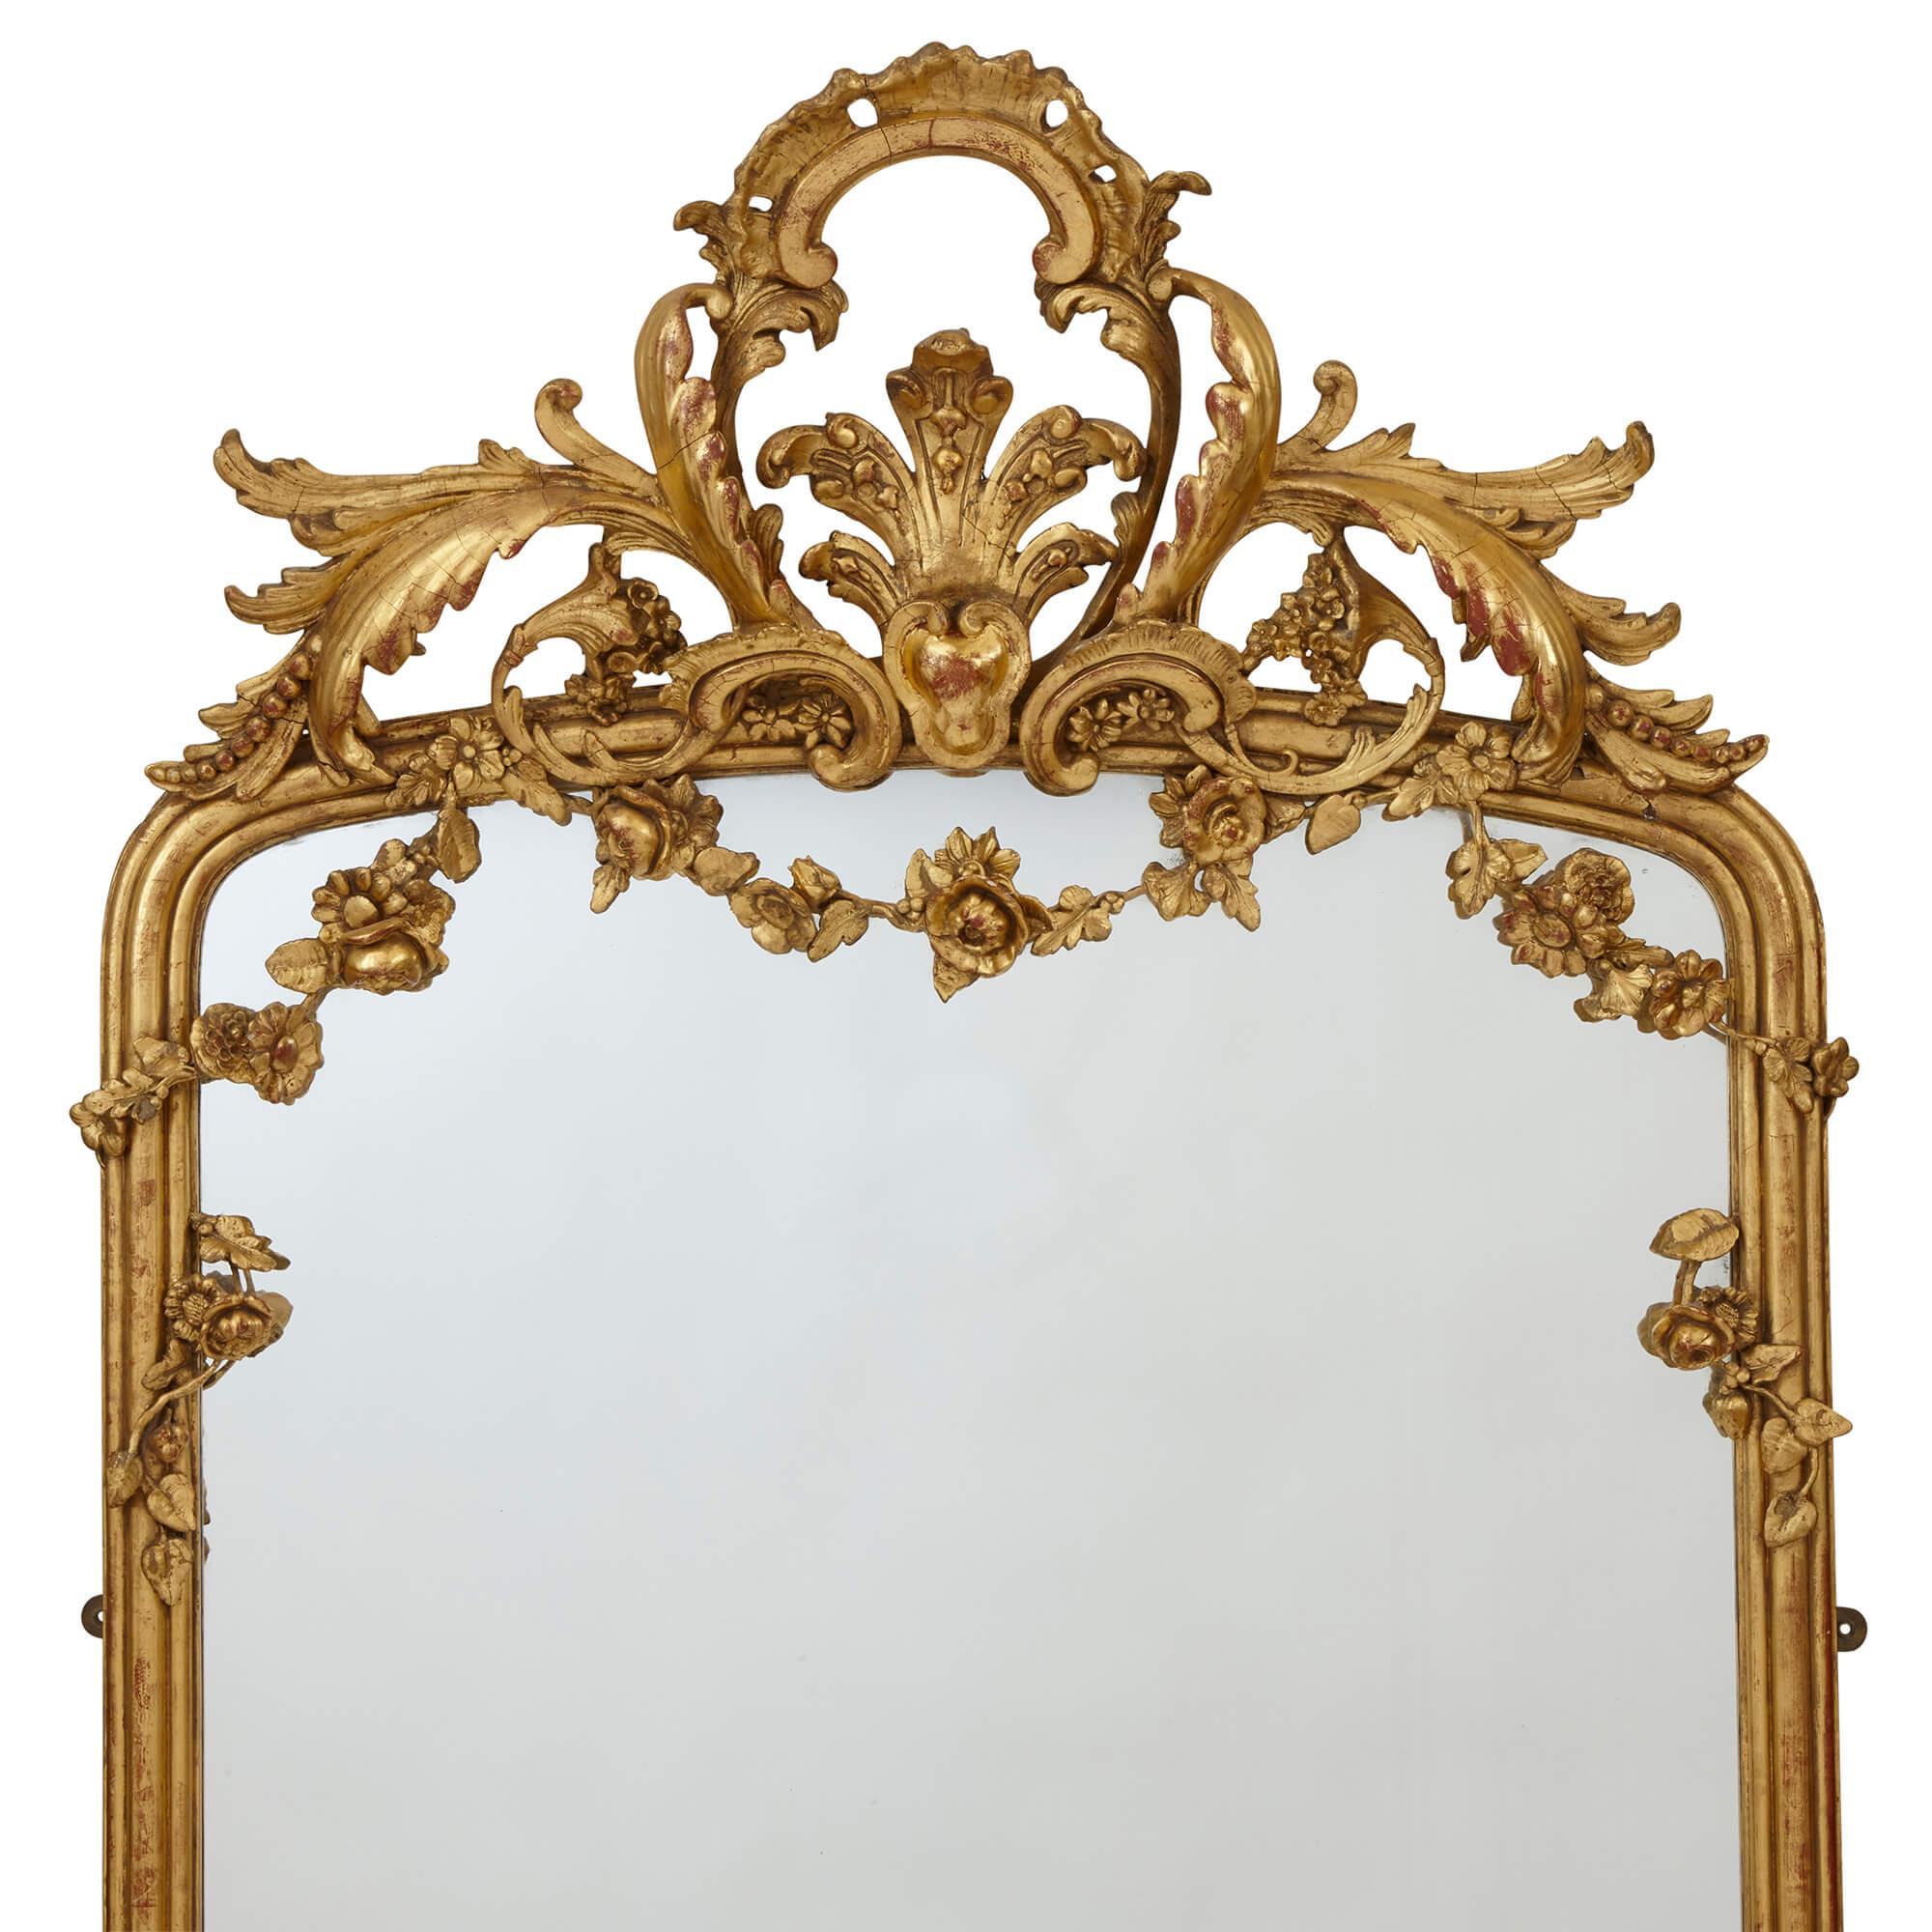 Pair of Large French Rococo Revival Giltwood Wall Mirrors In Good Condition For Sale In London, GB